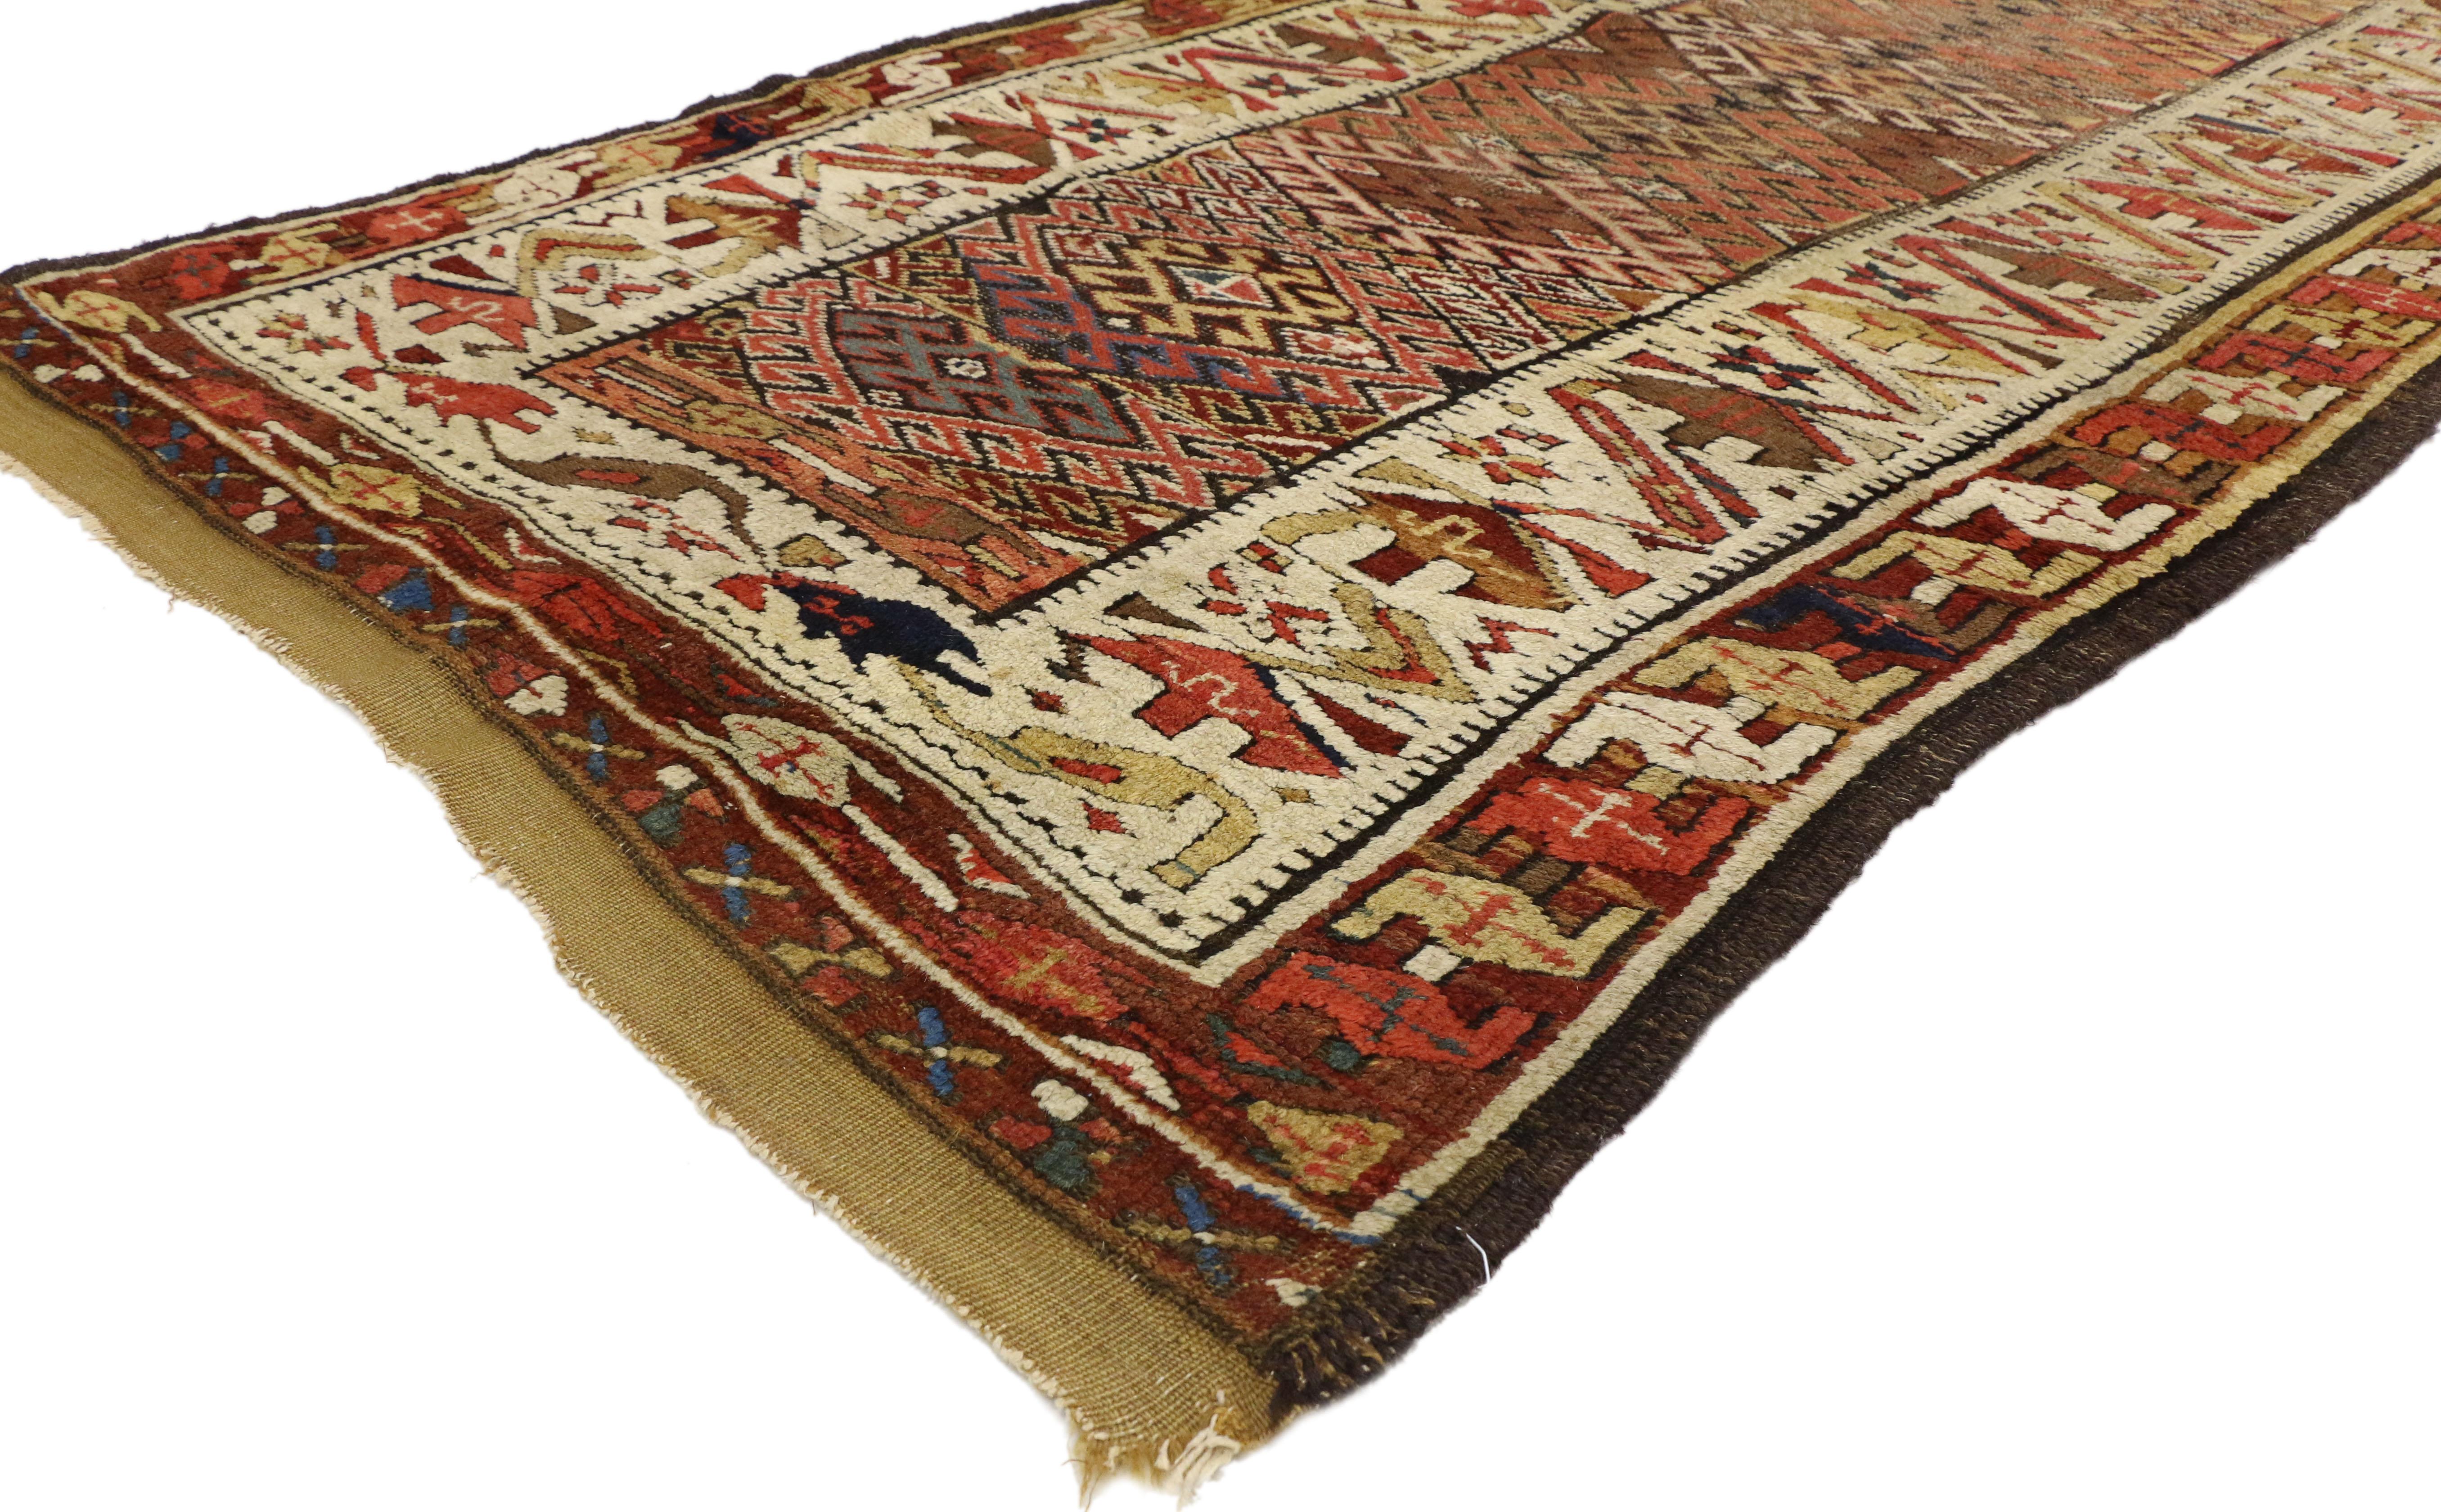 74294, antique Persian Kurdish Tribal runner, hallway runner. Imbued with symbolism, this eclectic antique Persian Kurdish runner with Tribal style exhibits a dynamic personality all its own. Featuring a psychedelic array of colors, interlocking